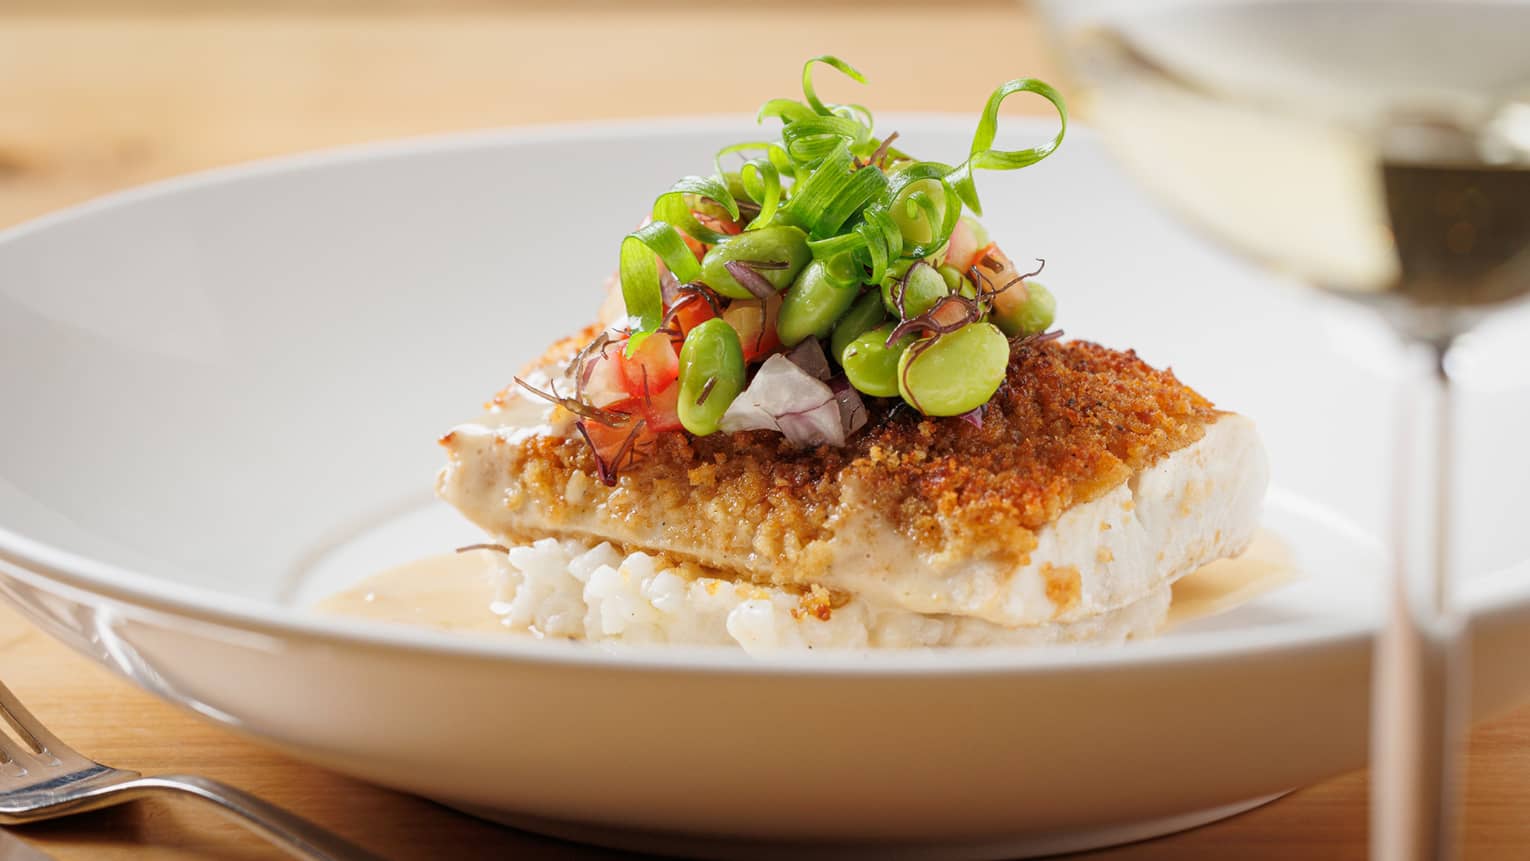 Seared white fish on bed of risotto, topped with edamame salad